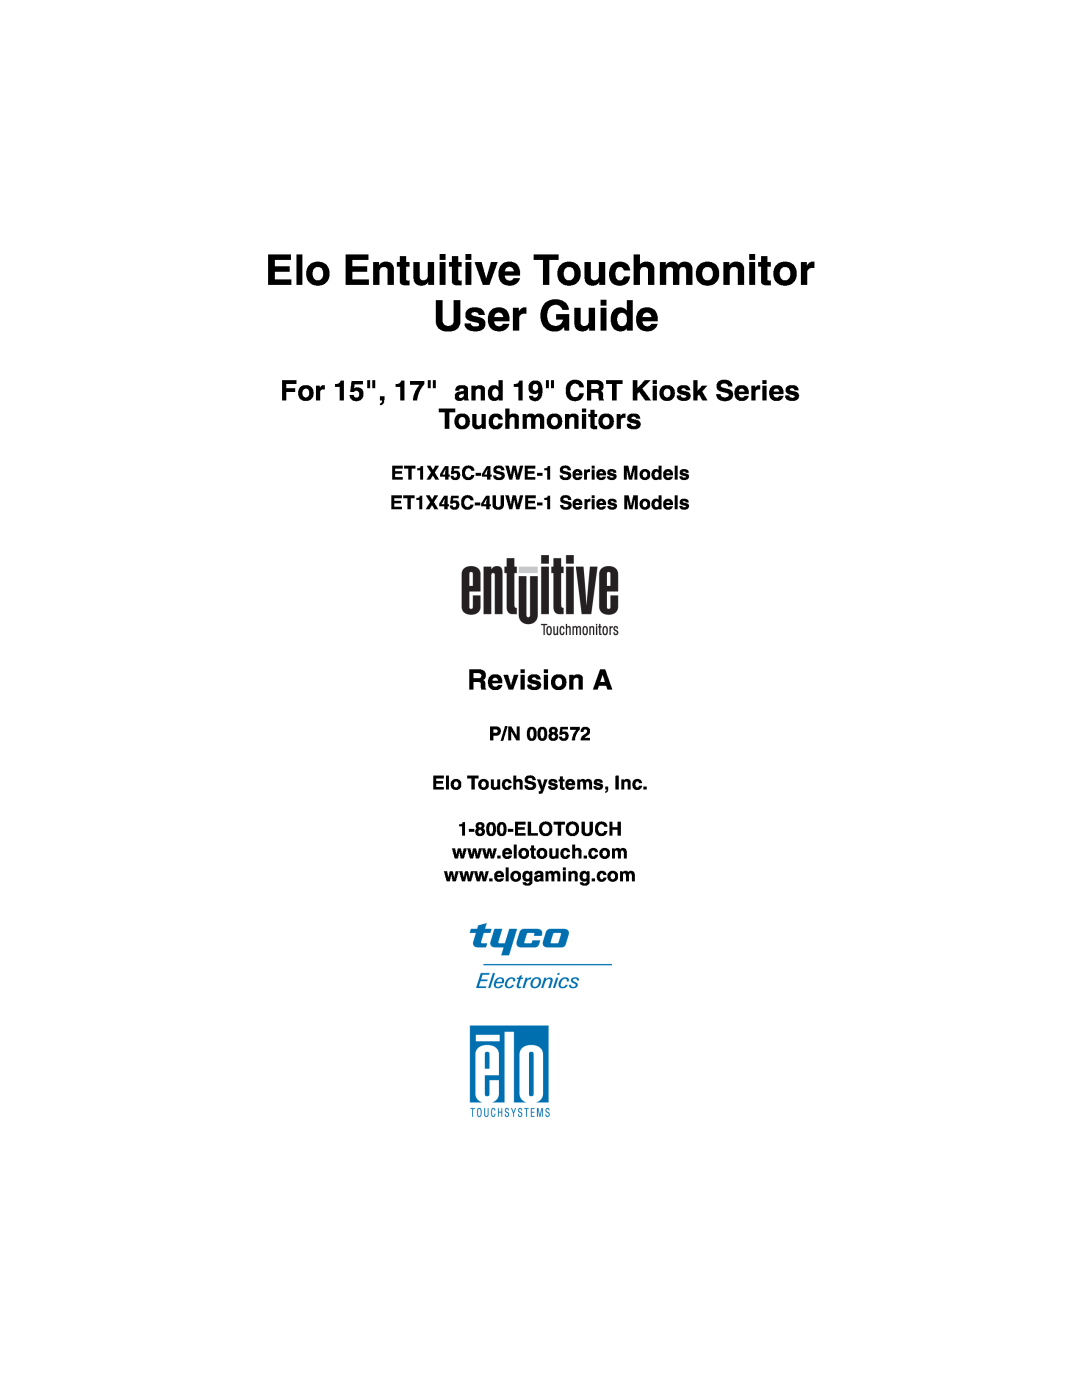 Elo TouchSystems manual ET1X45C-4SWE-1 Series Models ET1X45C-4UWE-1 Series Models, P/N Elo TouchSystems, Inc, Revision A 